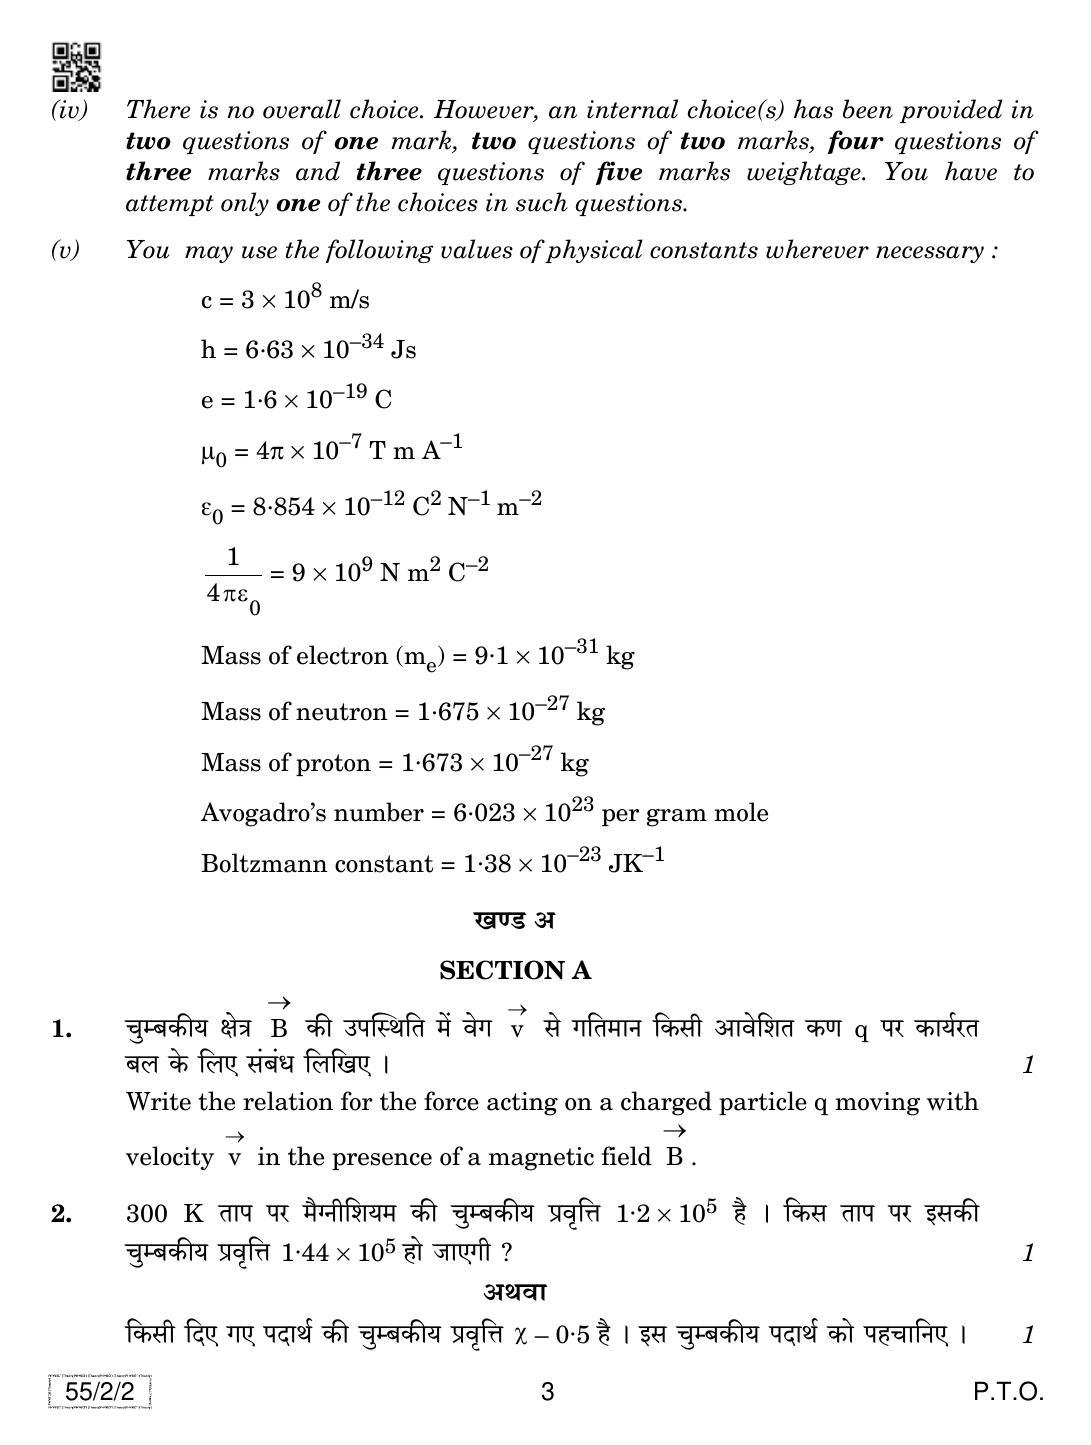 CBSE Class 12 55-2-2 Physics 2019 Question Paper - Page 3